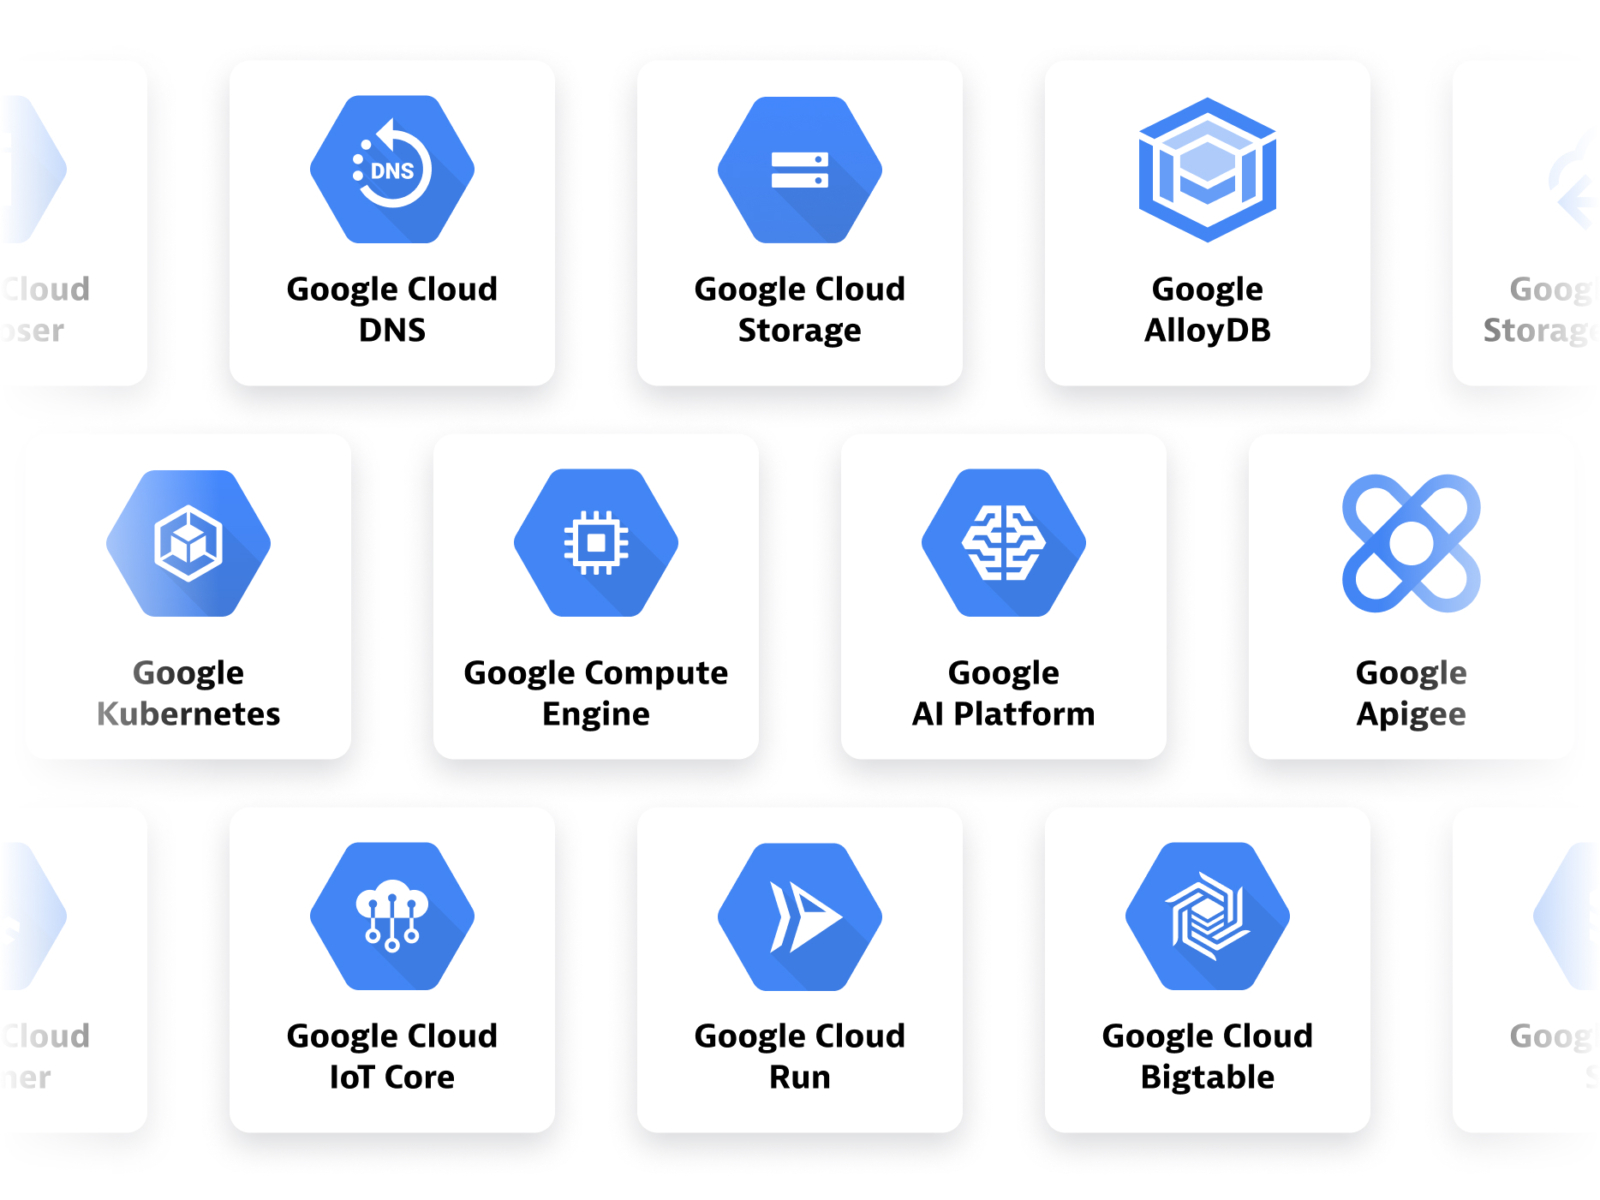 Google Cloud integrations with text